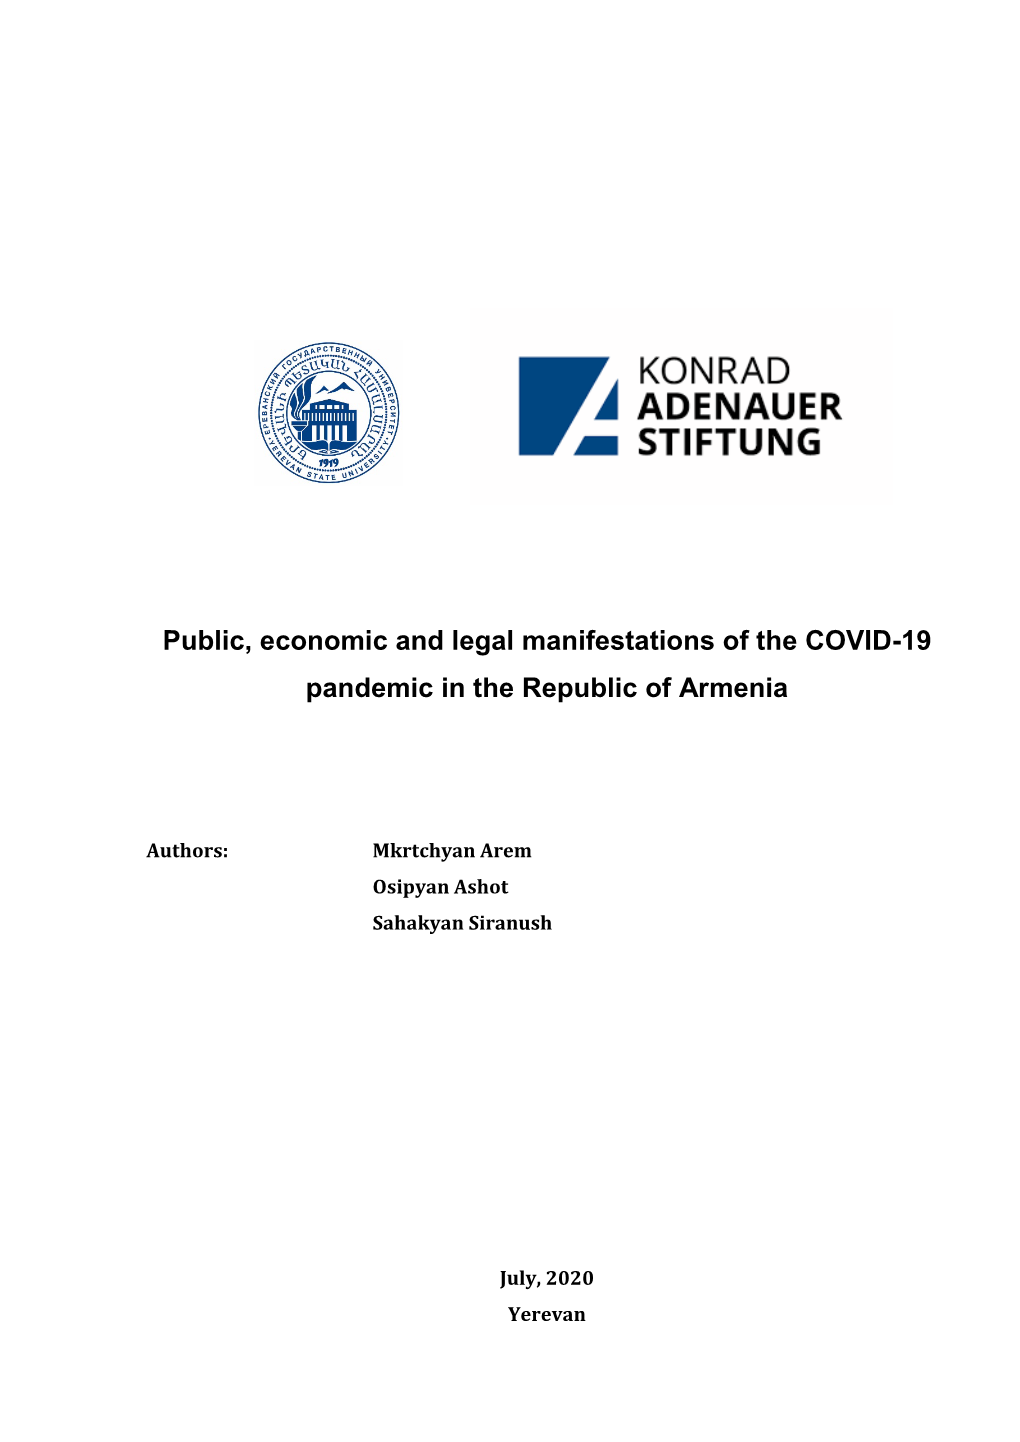 Public, Economic and Legal Manifestations of the COVID-19 Pandemic in the Republic of Armenia